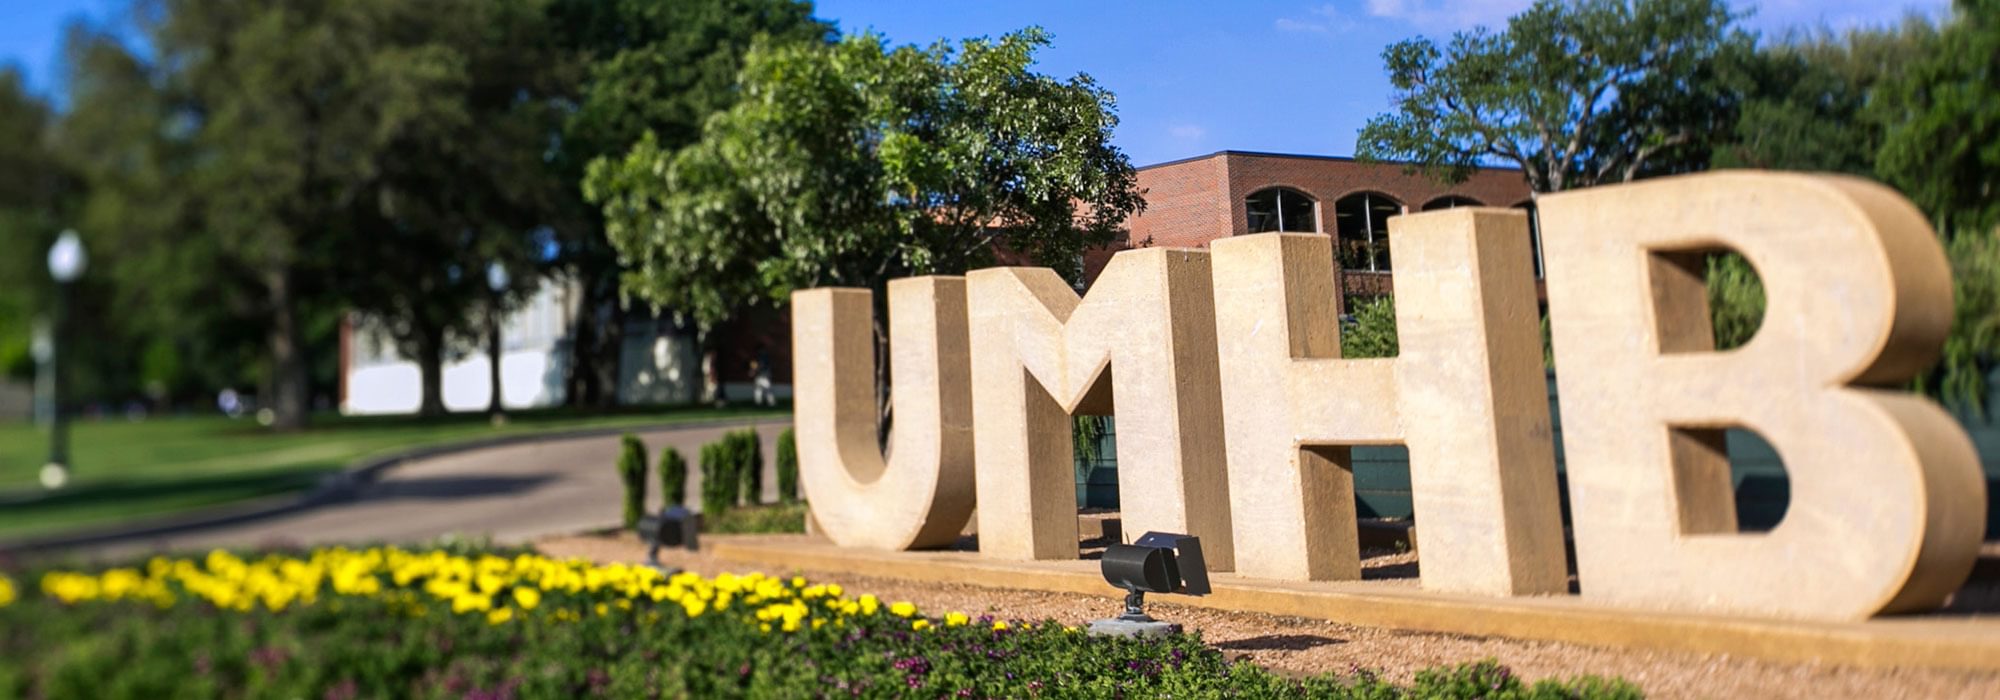 UMHB Hosts Immersive ArtsRush Experience for High School Students Next Friday